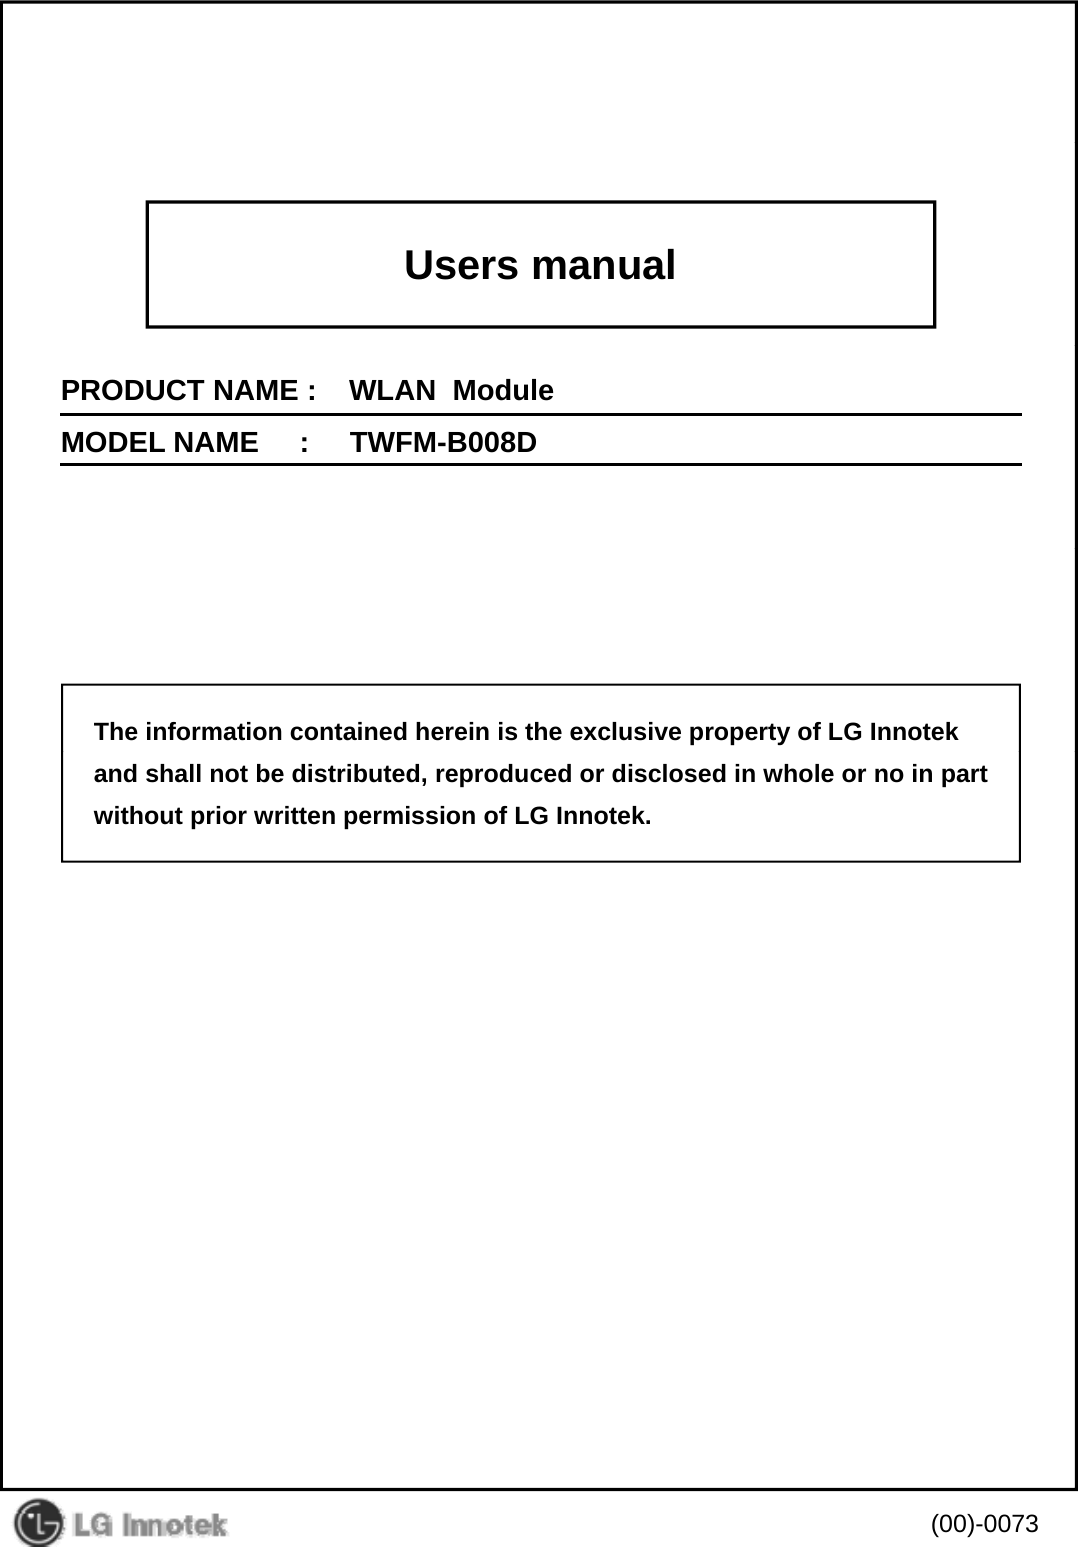 Users manualPRODUCT NAME :    WLAN  ModuleMODEL NAME     :     TWFM-B008DThe information contained herein is the exclusive property of LG Innotekand shall not be distributed, reproduced or disclosed in whole or no in partwithout prior written permission of LG Innotek.(00)-0073